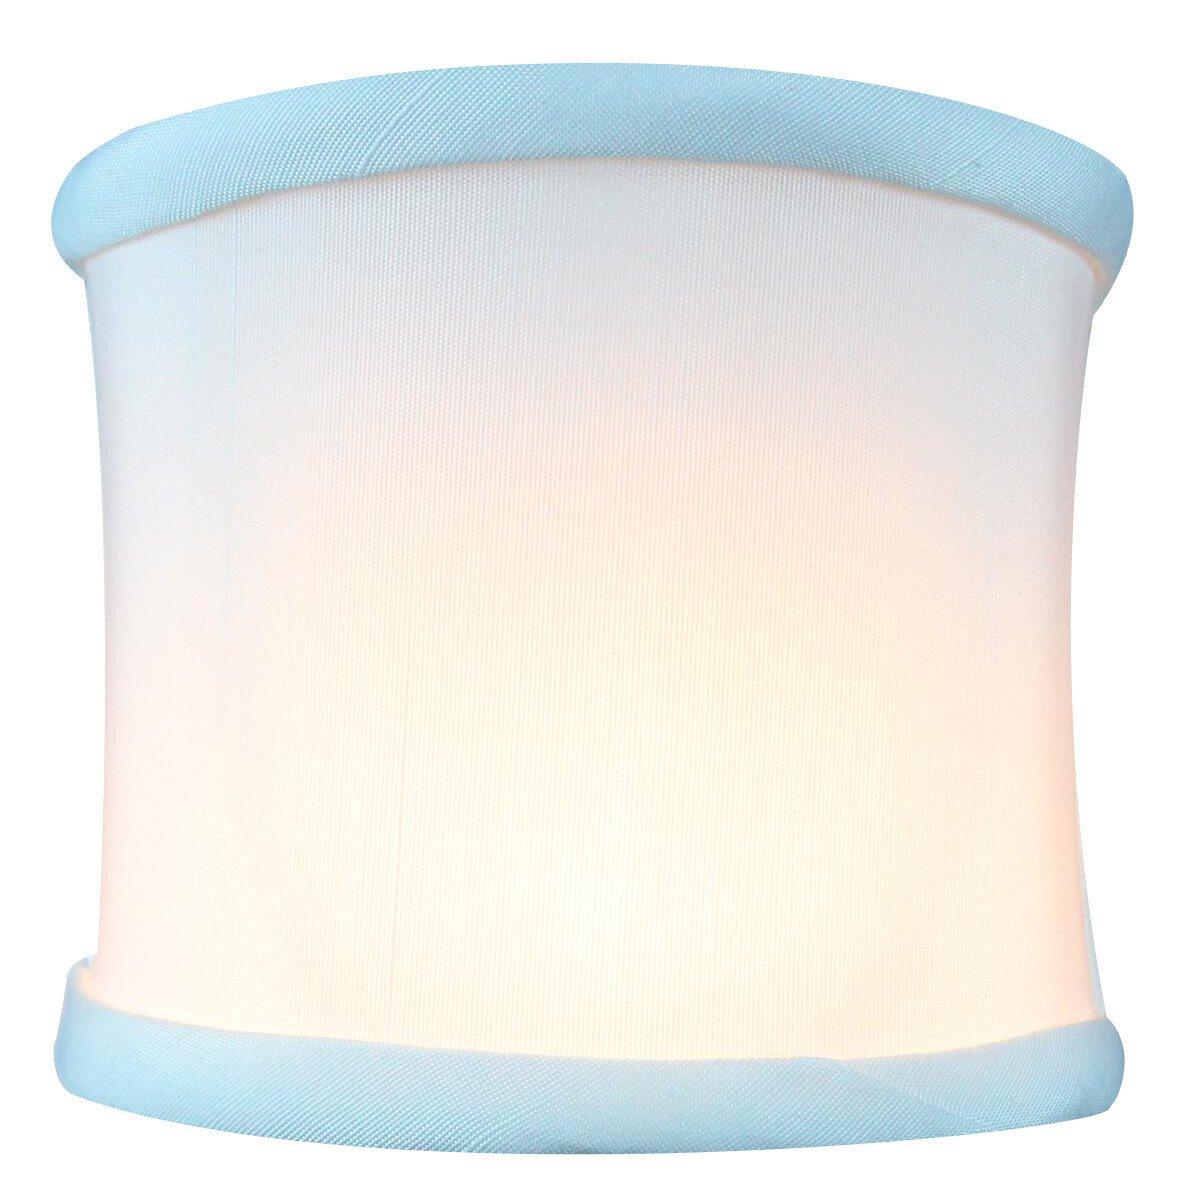 4" White Shantung Clip-on Sconce Lampshade - Specialty Shades